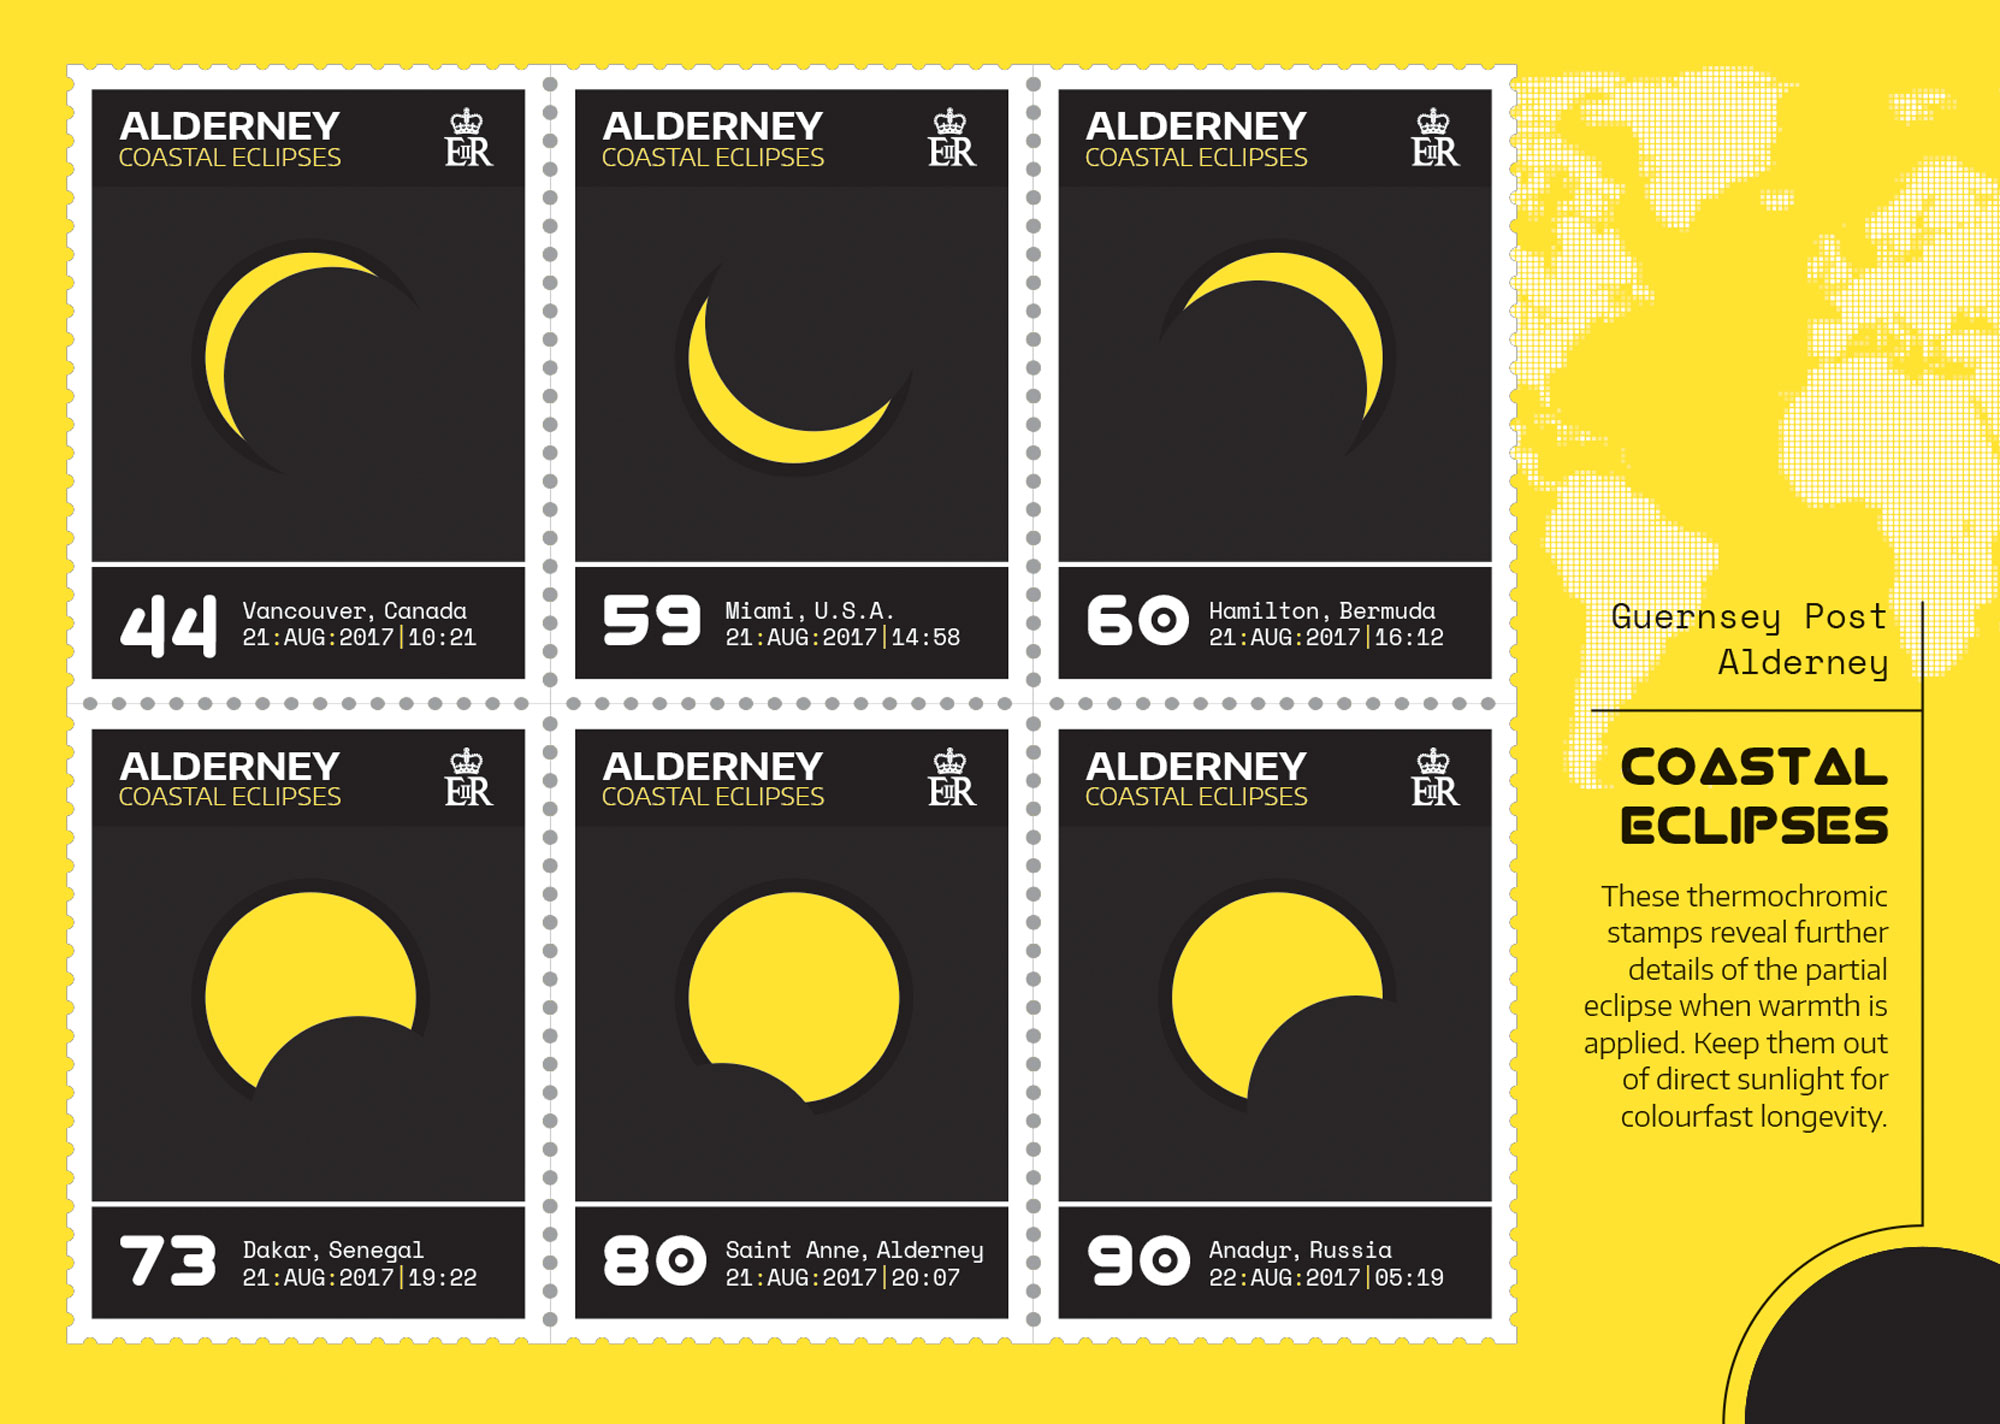 Guernsey Post celebrates total eclipse with image-changing stamps